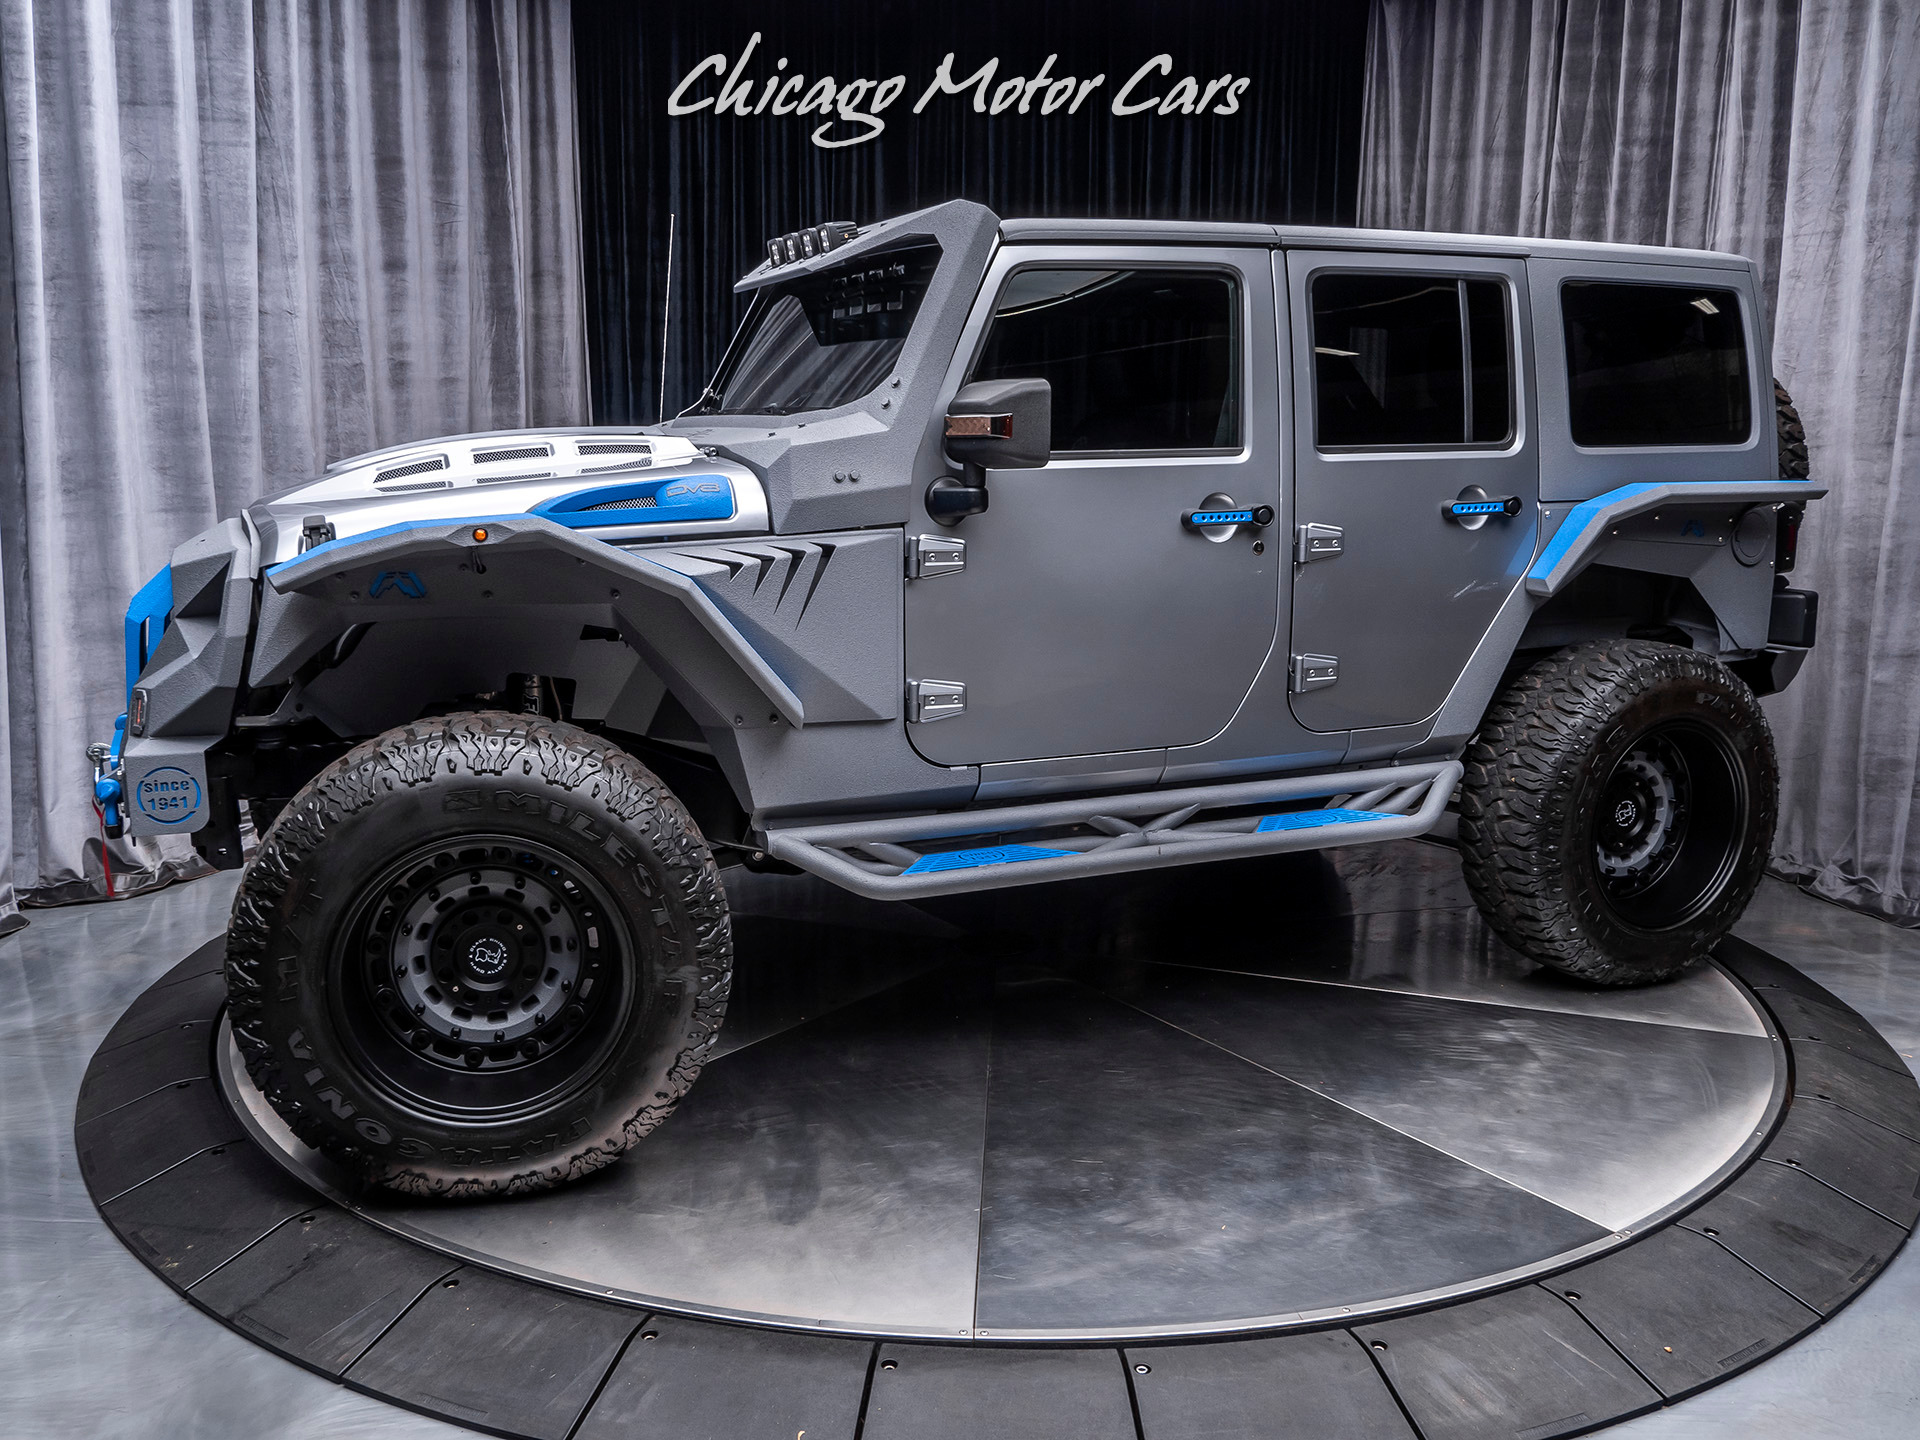 Used 2018 Jeep Wrangler JK Unlimited Sport SUV Freedom Edition! LOADED WITH  UPGRADES! For Sale (Special Pricing) | Chicago Motor Cars Stock #15997